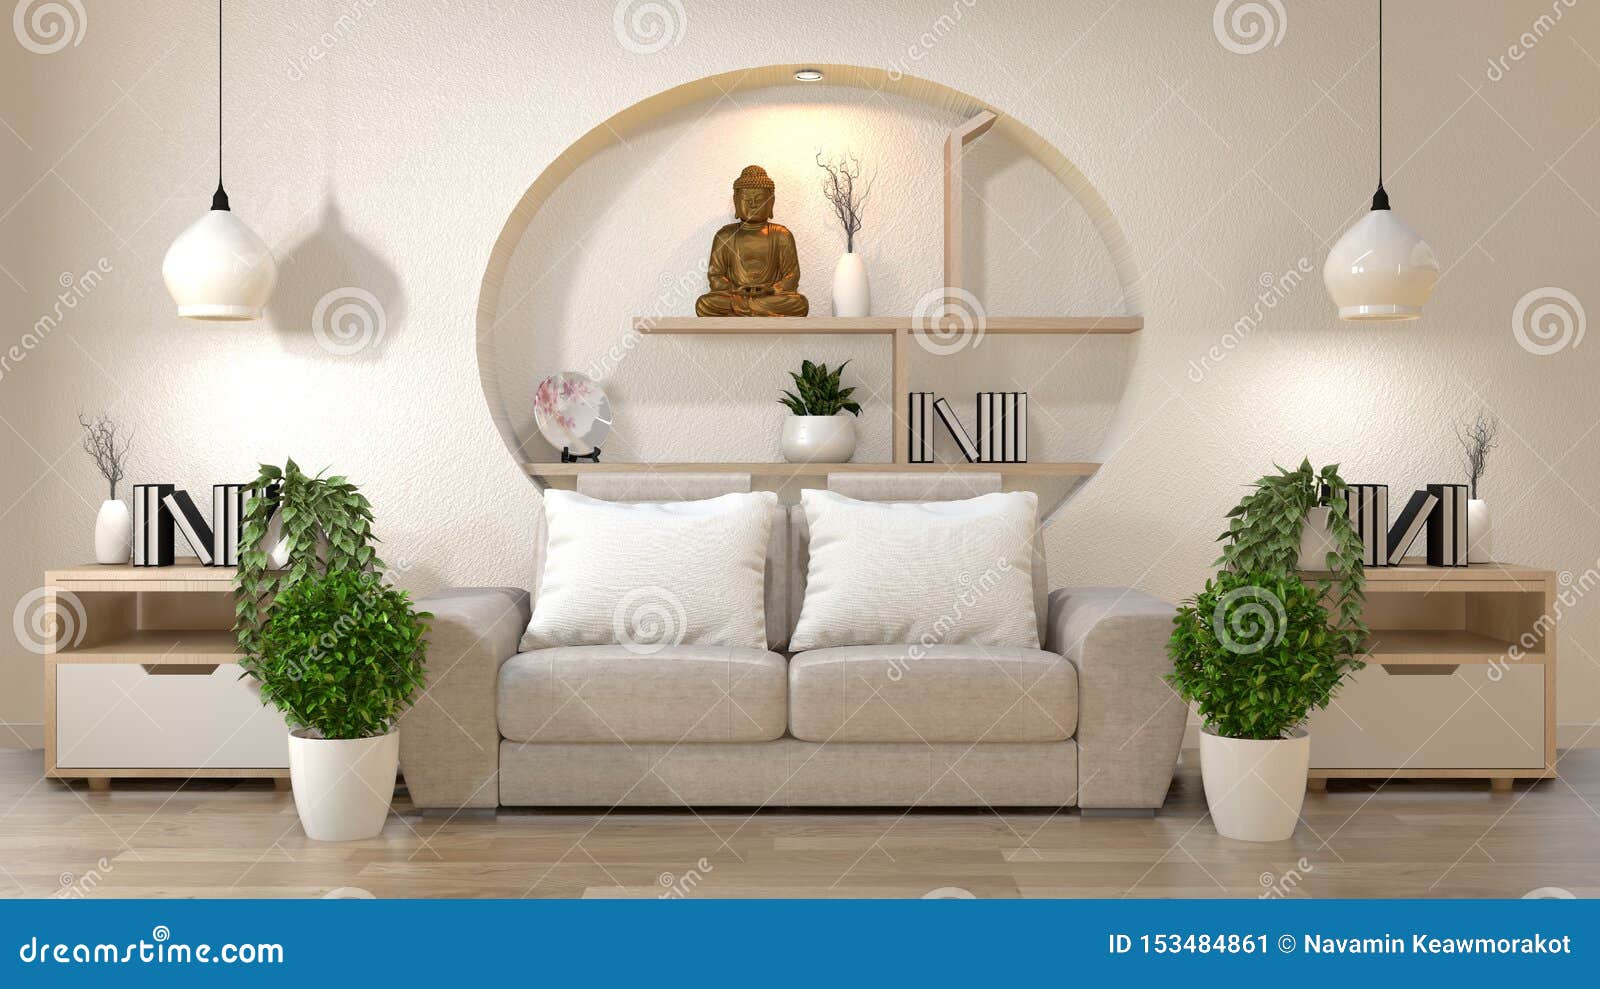 Living Room Zen Interior Decoration on Shelf Wall Mock Up with Sofa and ...